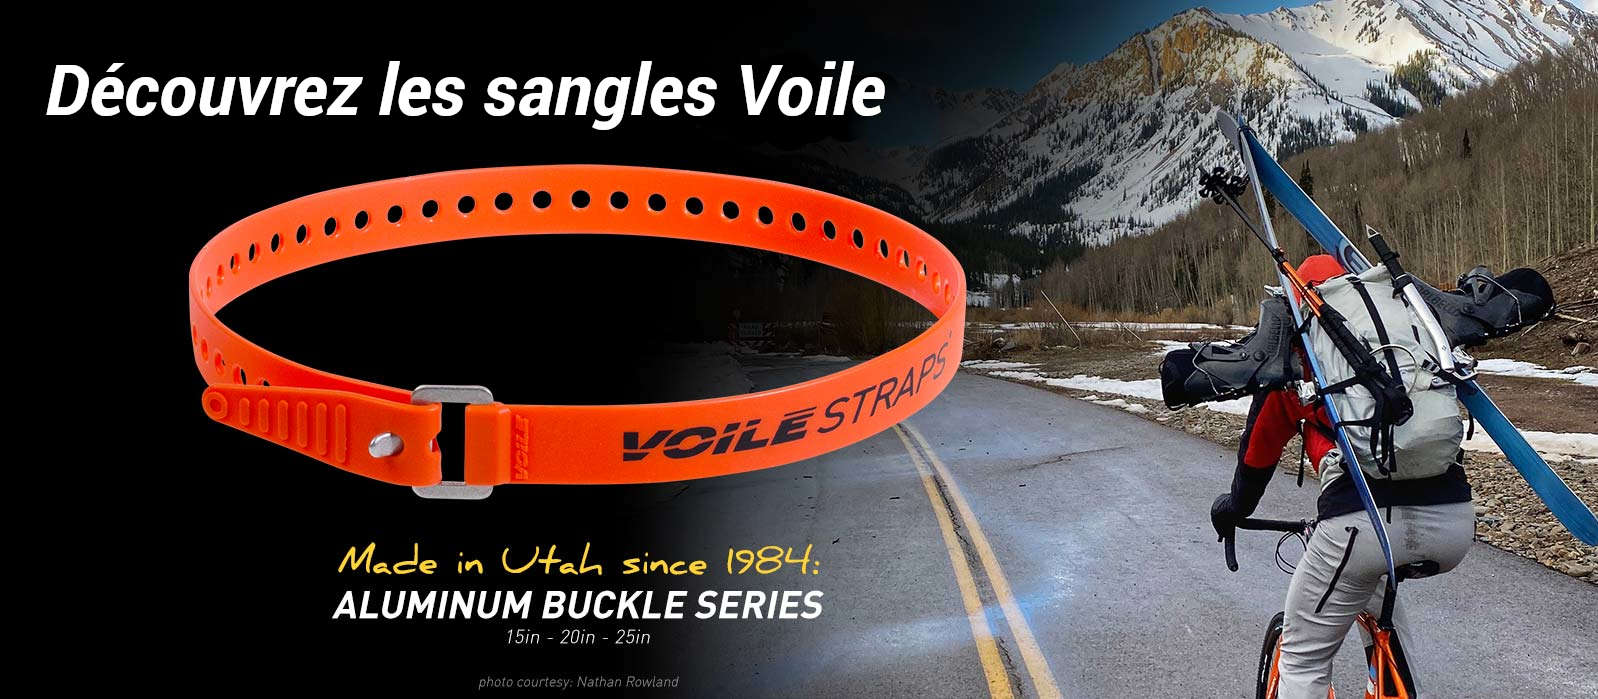 Gamme Voile Straps